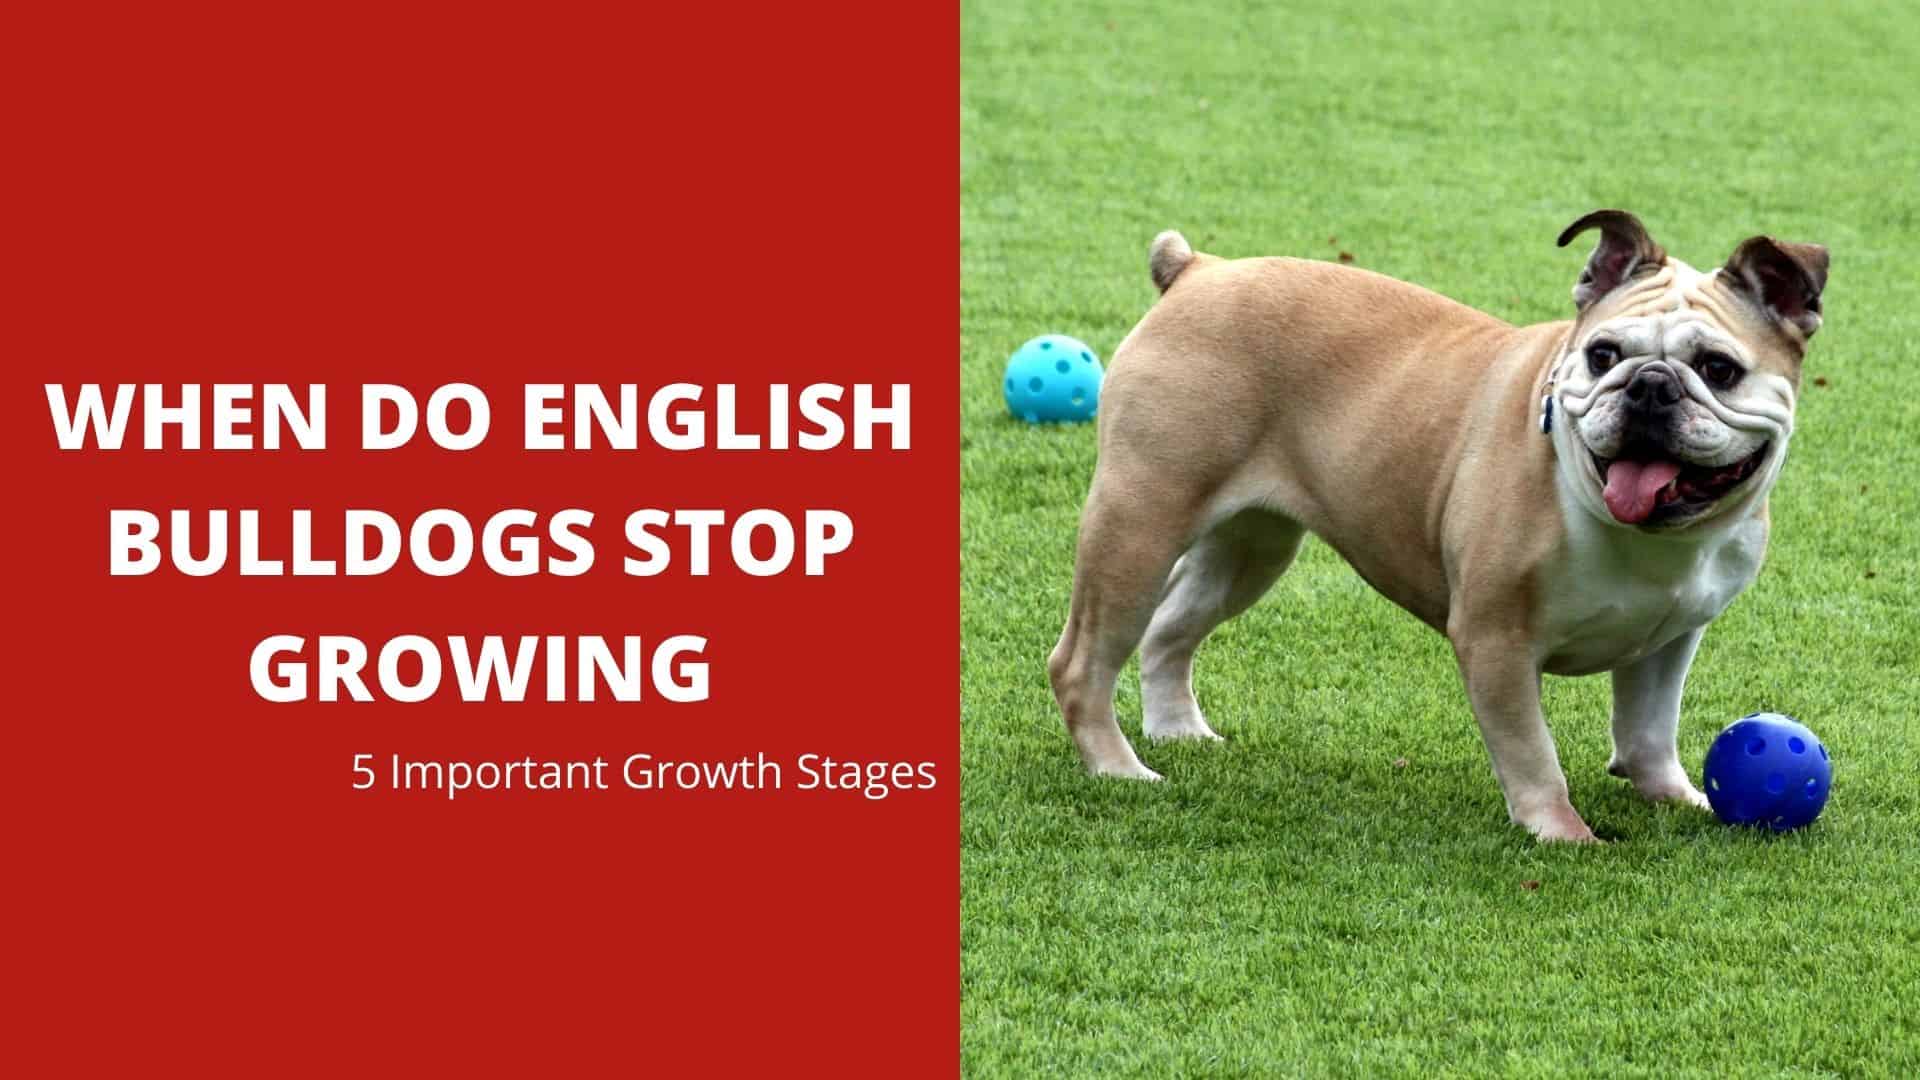 When Do English Bulldogs Stop Growing – 5 Important Growth Stages